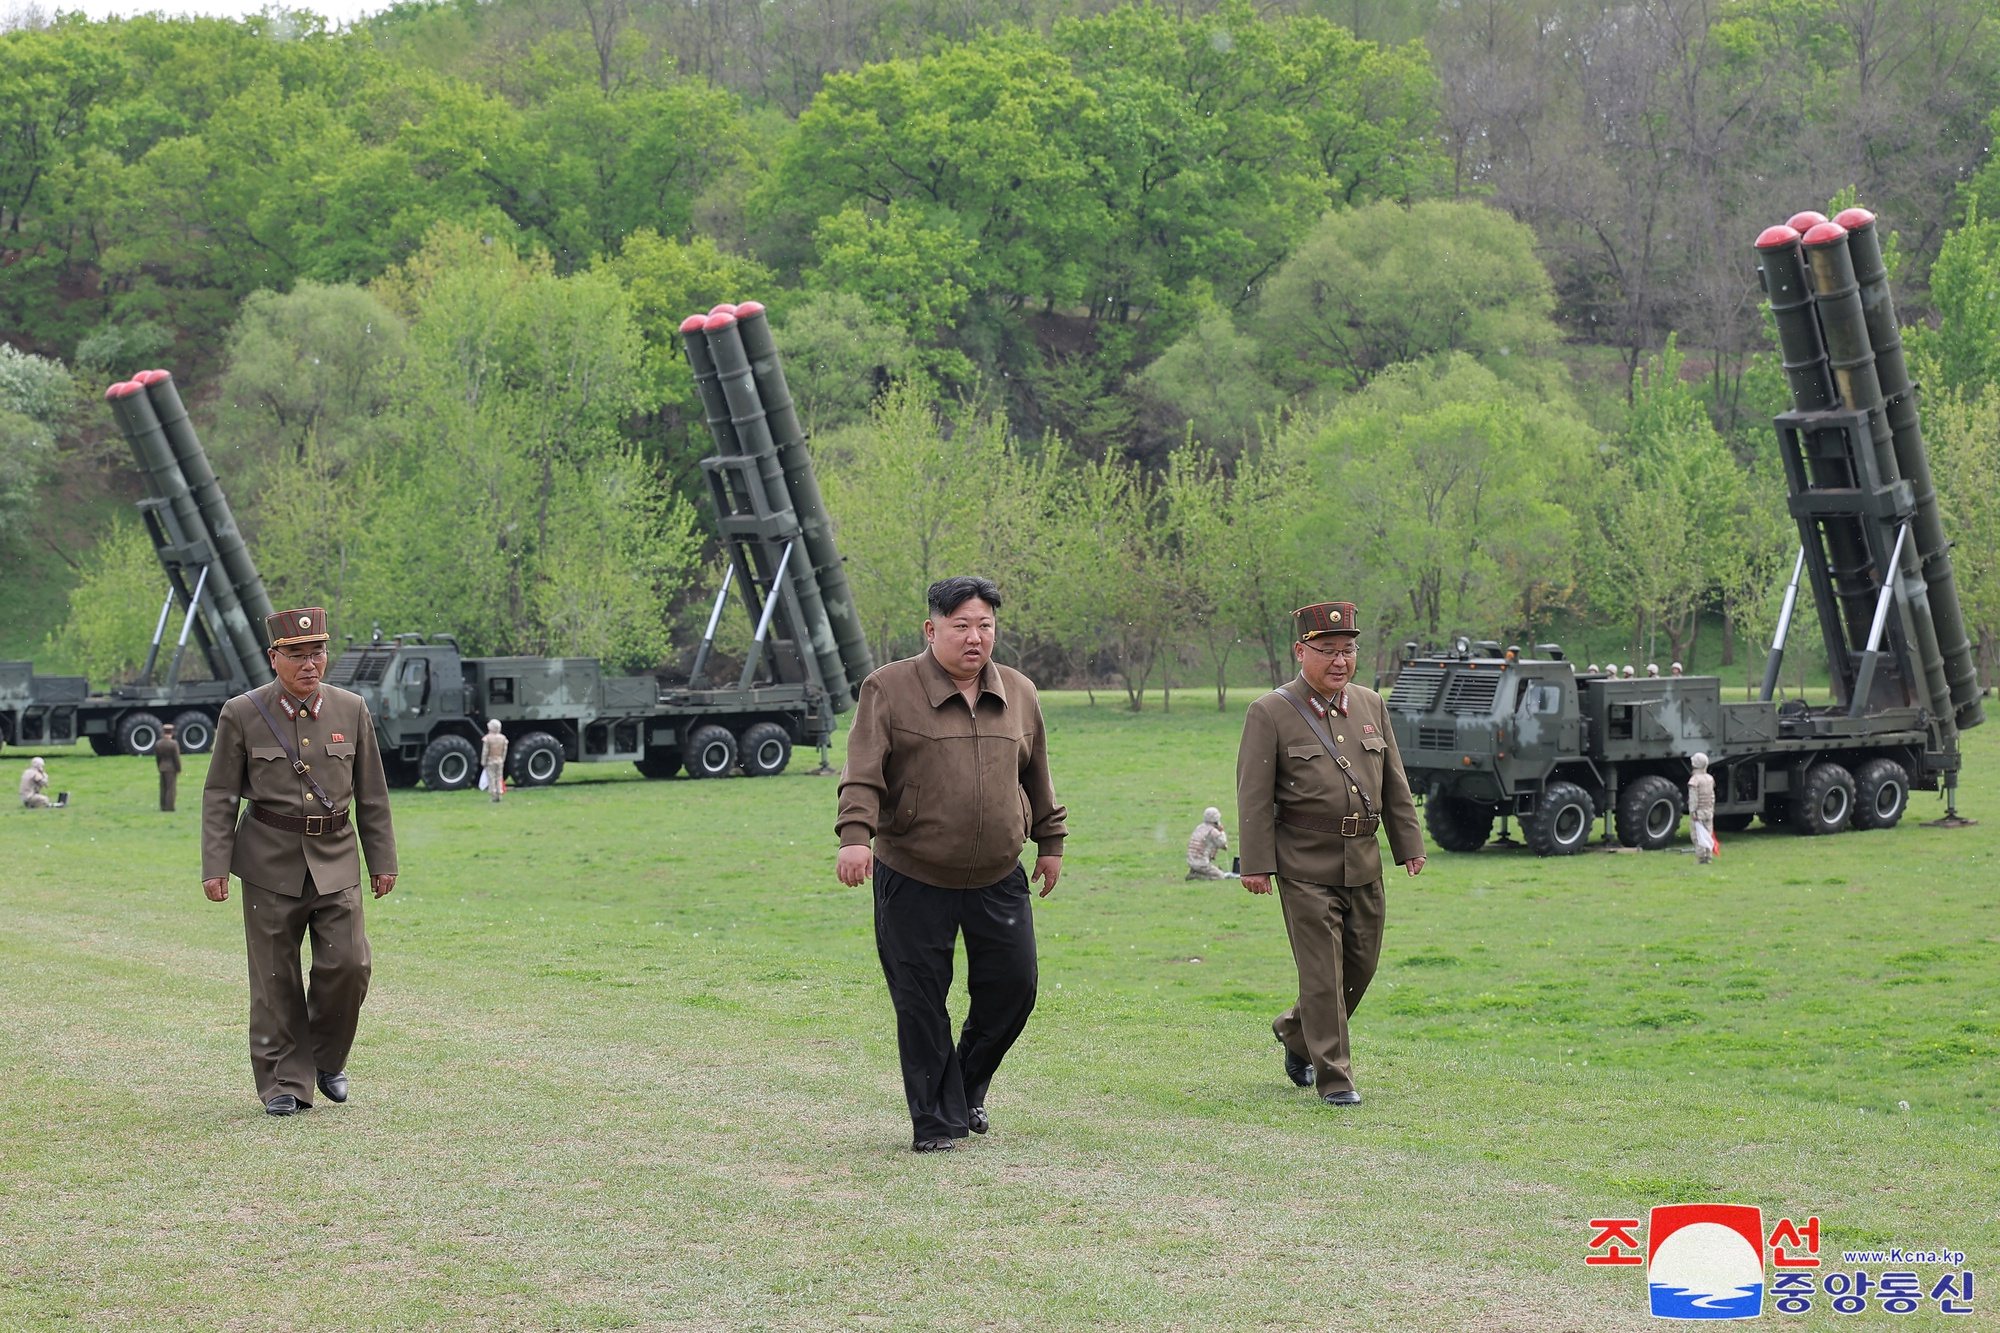 epa11294997 A photo released by the official North Korean Central News Agency (KCNA) shows North Korean leader Kim Jong Un (C) overseeing a simulated nuclear counterattack drill at an undisclosed location, North Korea, 22 April 2024 (issued 23 April 2024). According to KCNA, North leader Kim Jong Un on 22 April &#039;guided a combined tactical drill simulating a nuclear counterattack involving super-large multiple rocket artillerymen&#039;.  EPA/KCNA   EDITORIAL USE ONLY  EDITORIAL USE ONLY